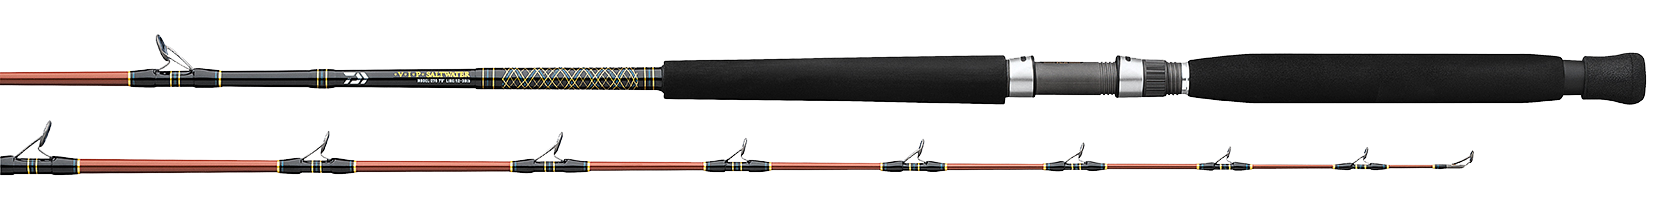 VIP-A Saltwater Rod, Sections= 1, Line Wt.= 15-40